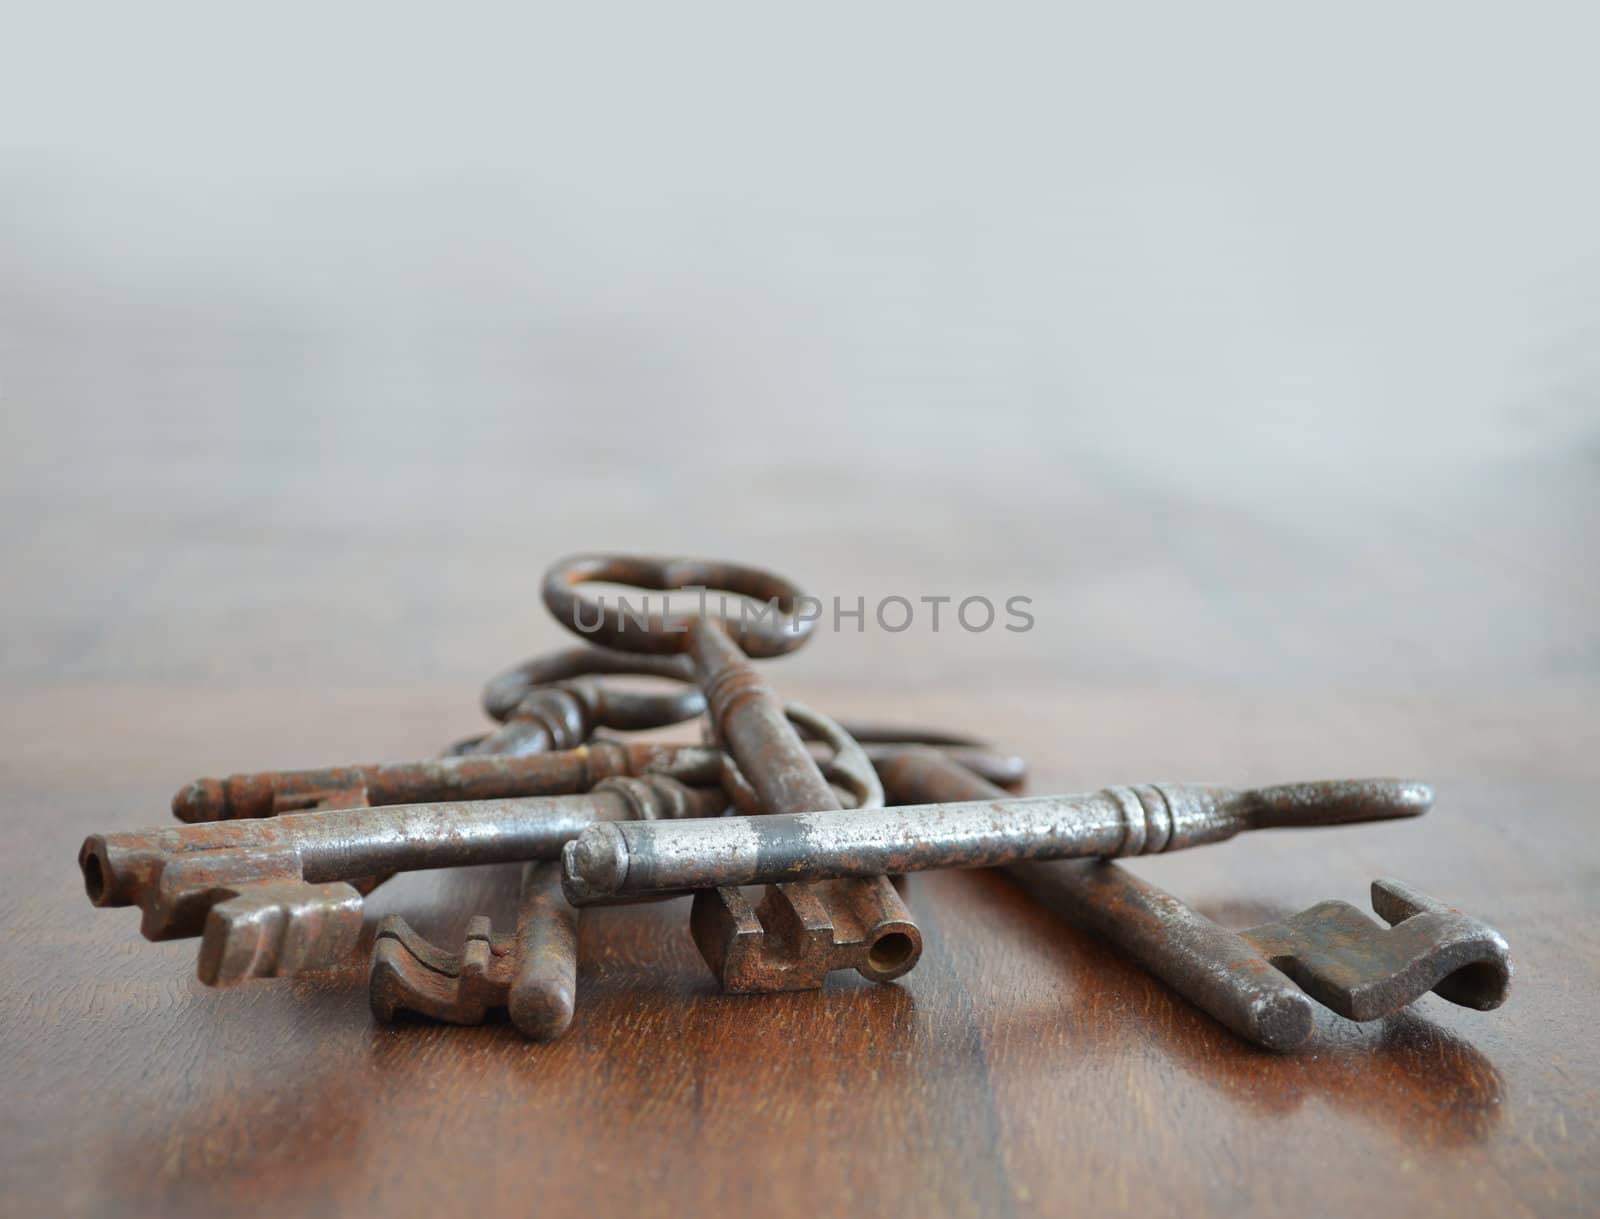 Bunch of old rusted keys on wood surface